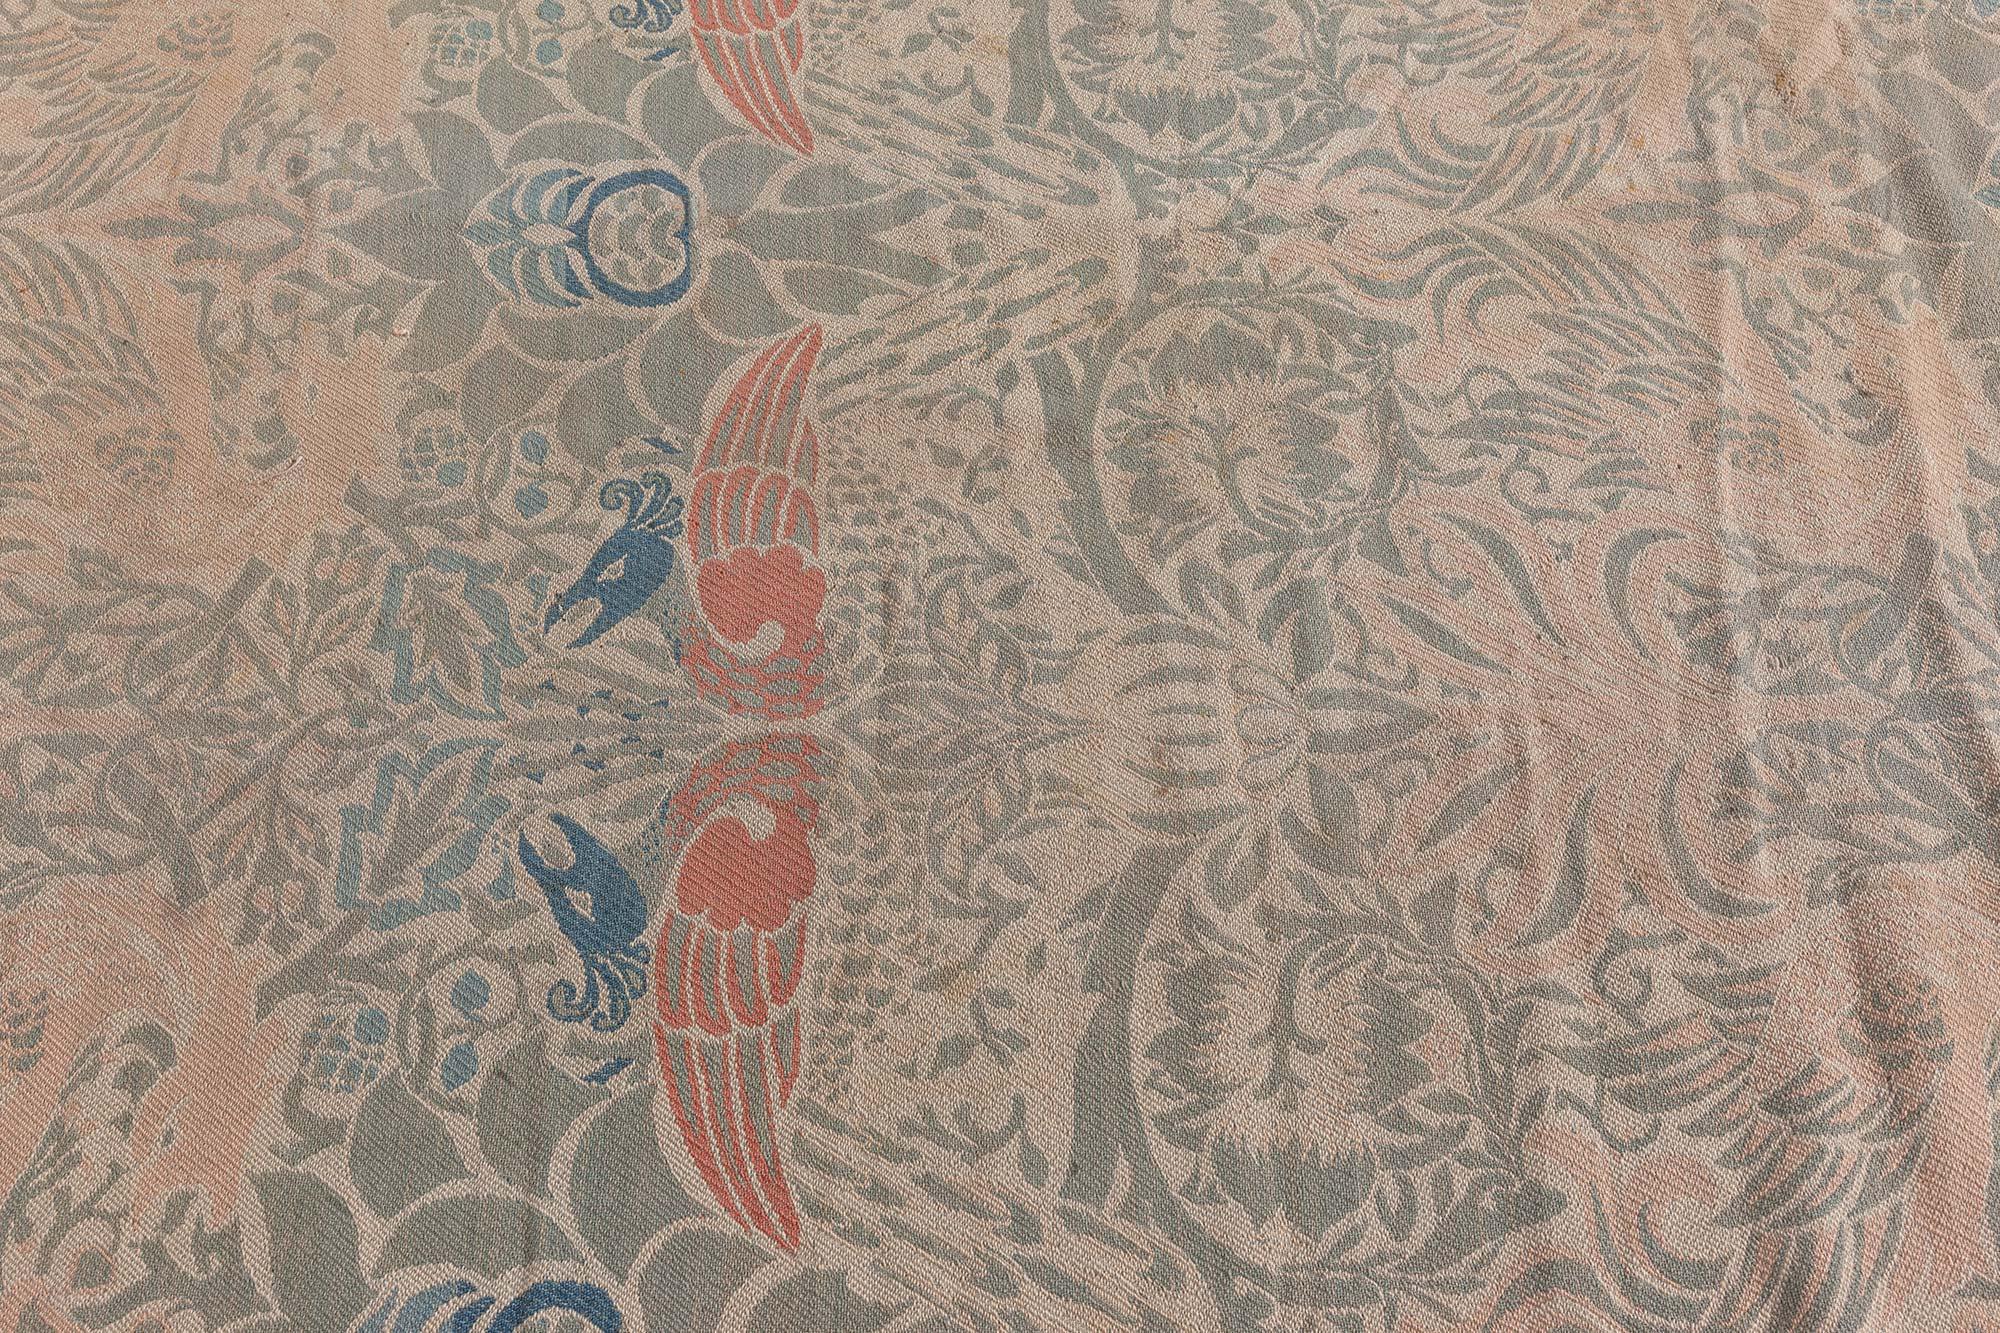 Arts and Crafts 1900s William Morris Textile For Sale